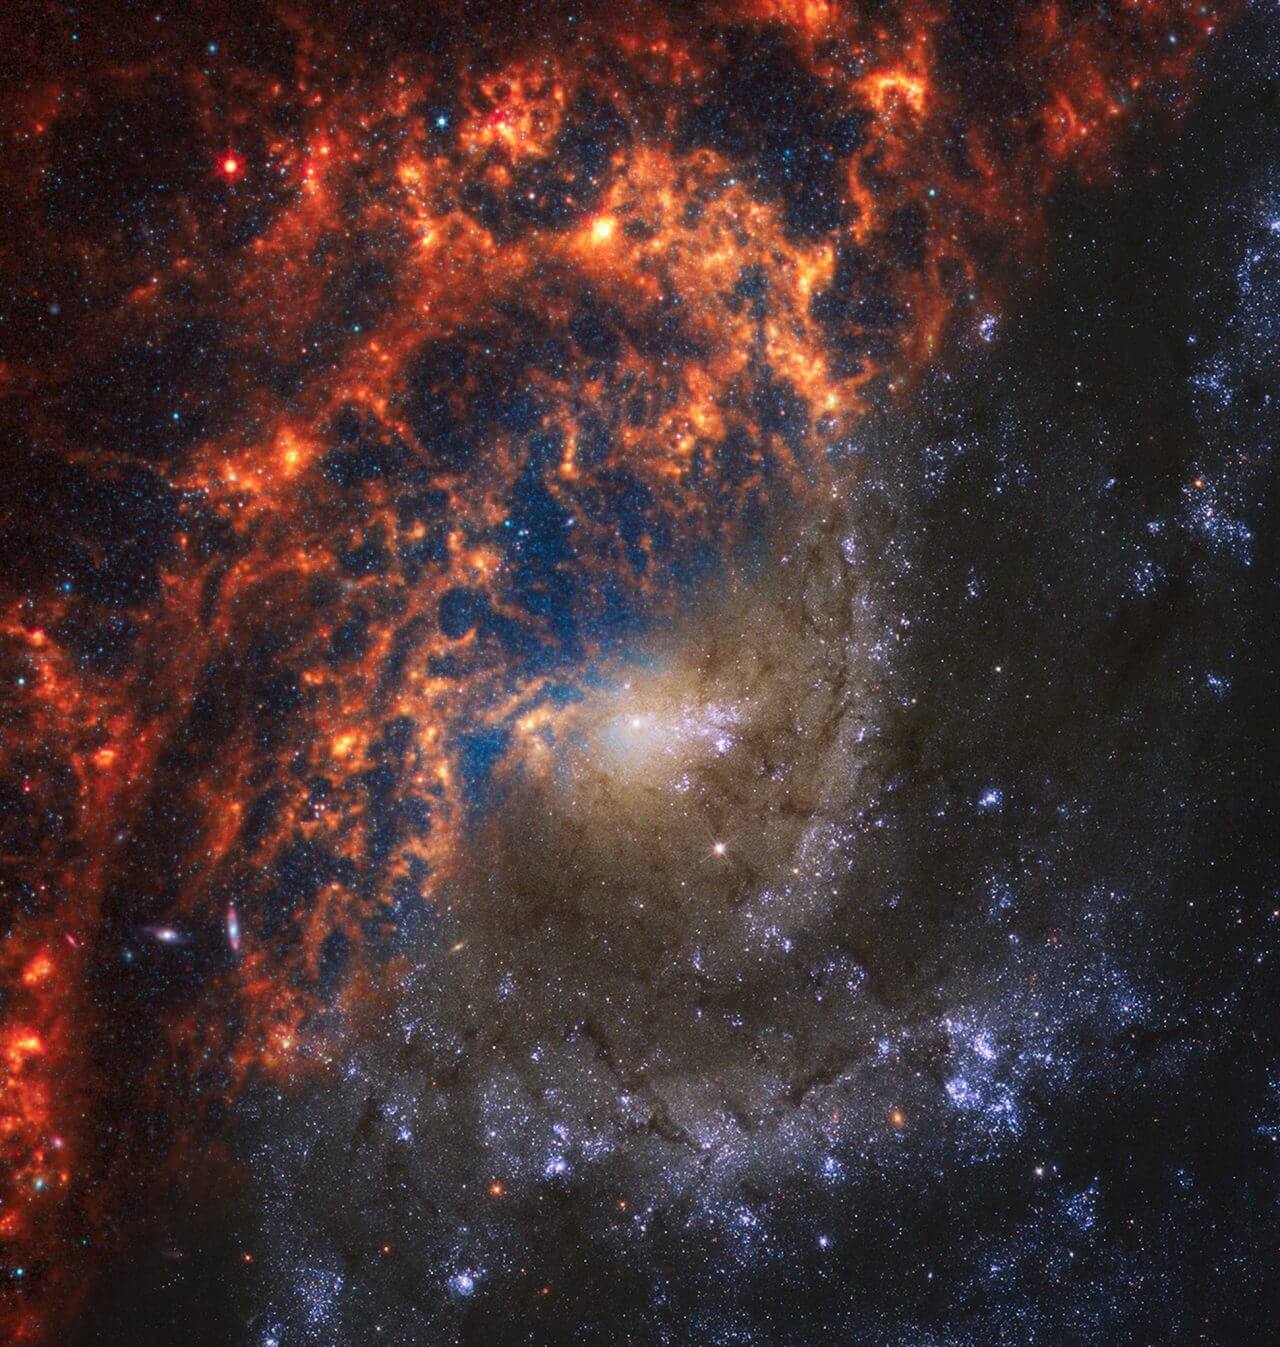 The galaxy “NGC 2835” in the Hydra constellation was observed by Webb and Hubble using two space telescopes. The Universe Gateway website